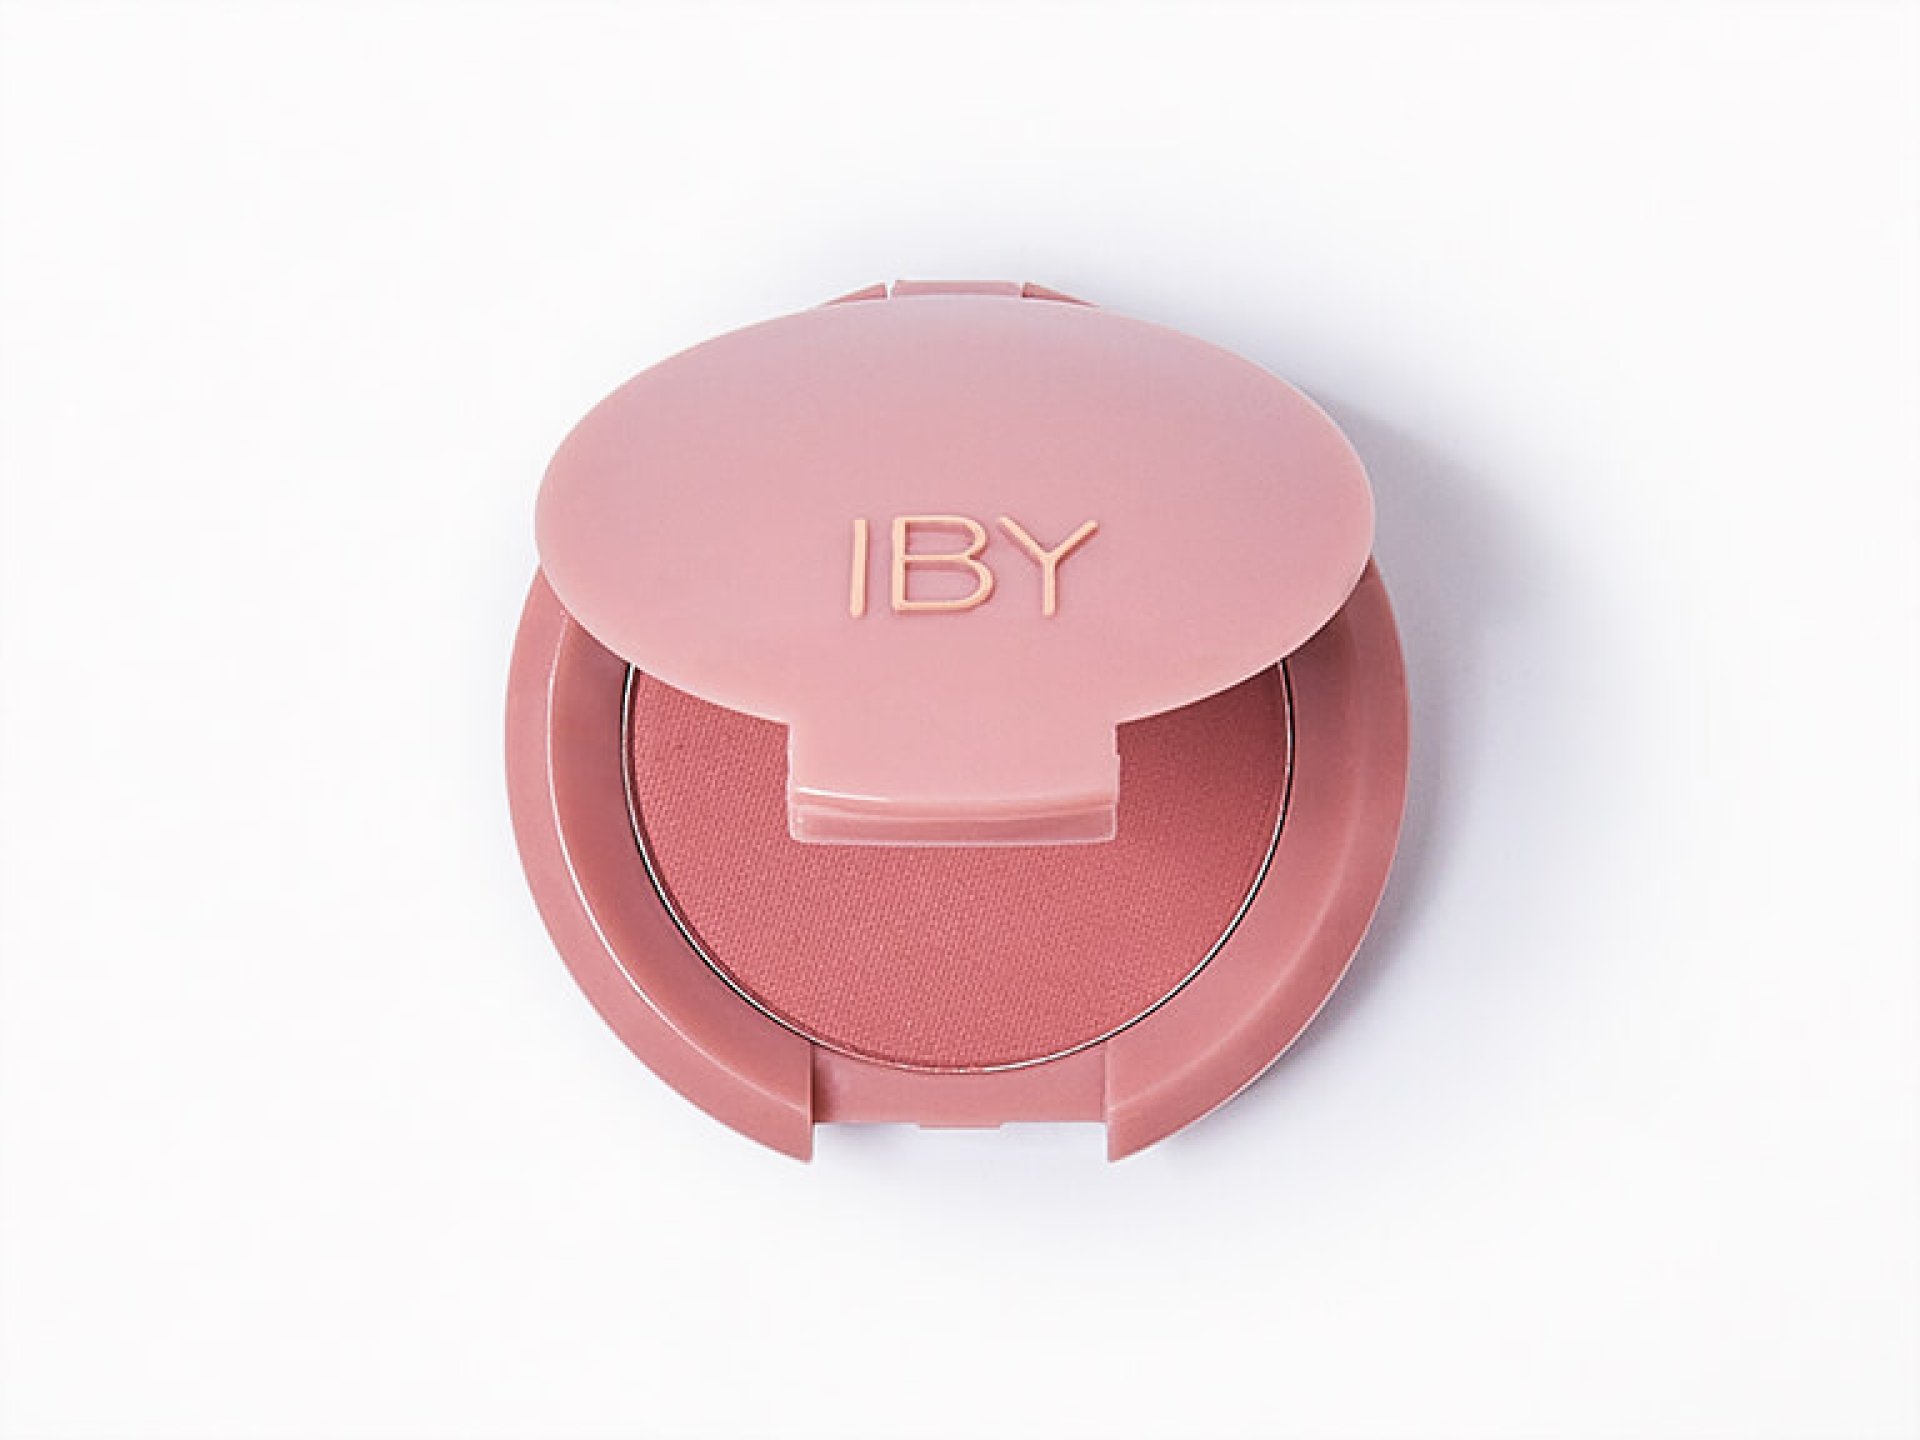 IBY BEAUTY Carry On 2 Face Palette in Sun Kissed